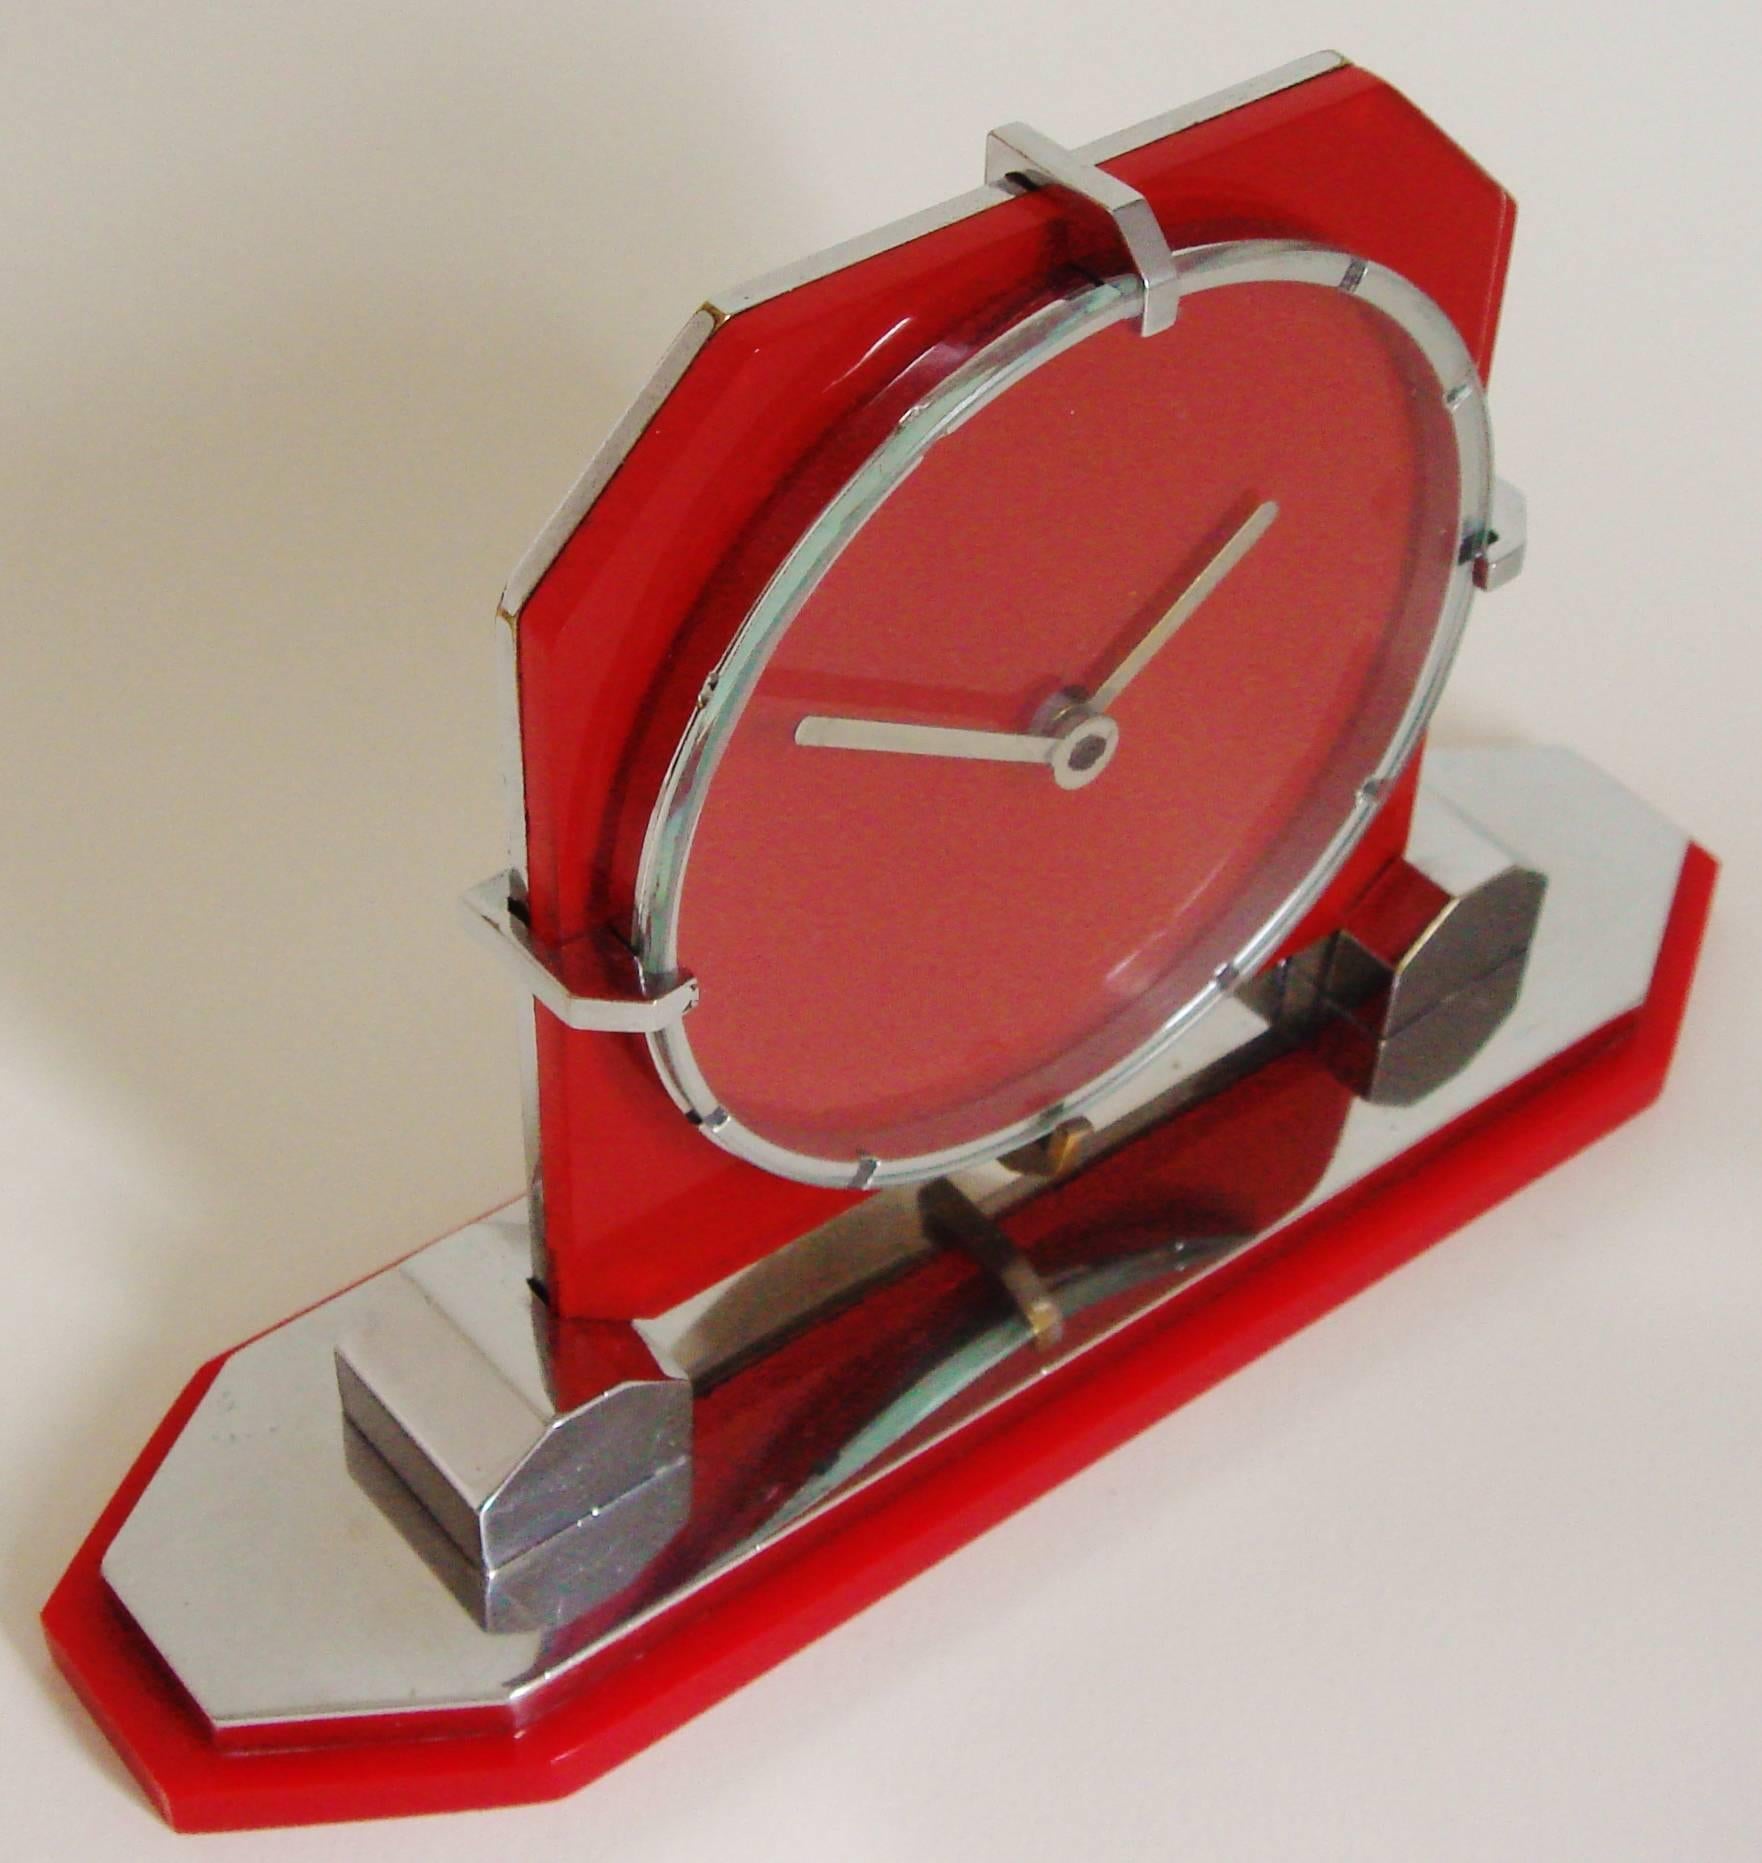 Exquisite English Art Deco Red Glass, Red Lucite and Chrome Geometric Desk Clock 1